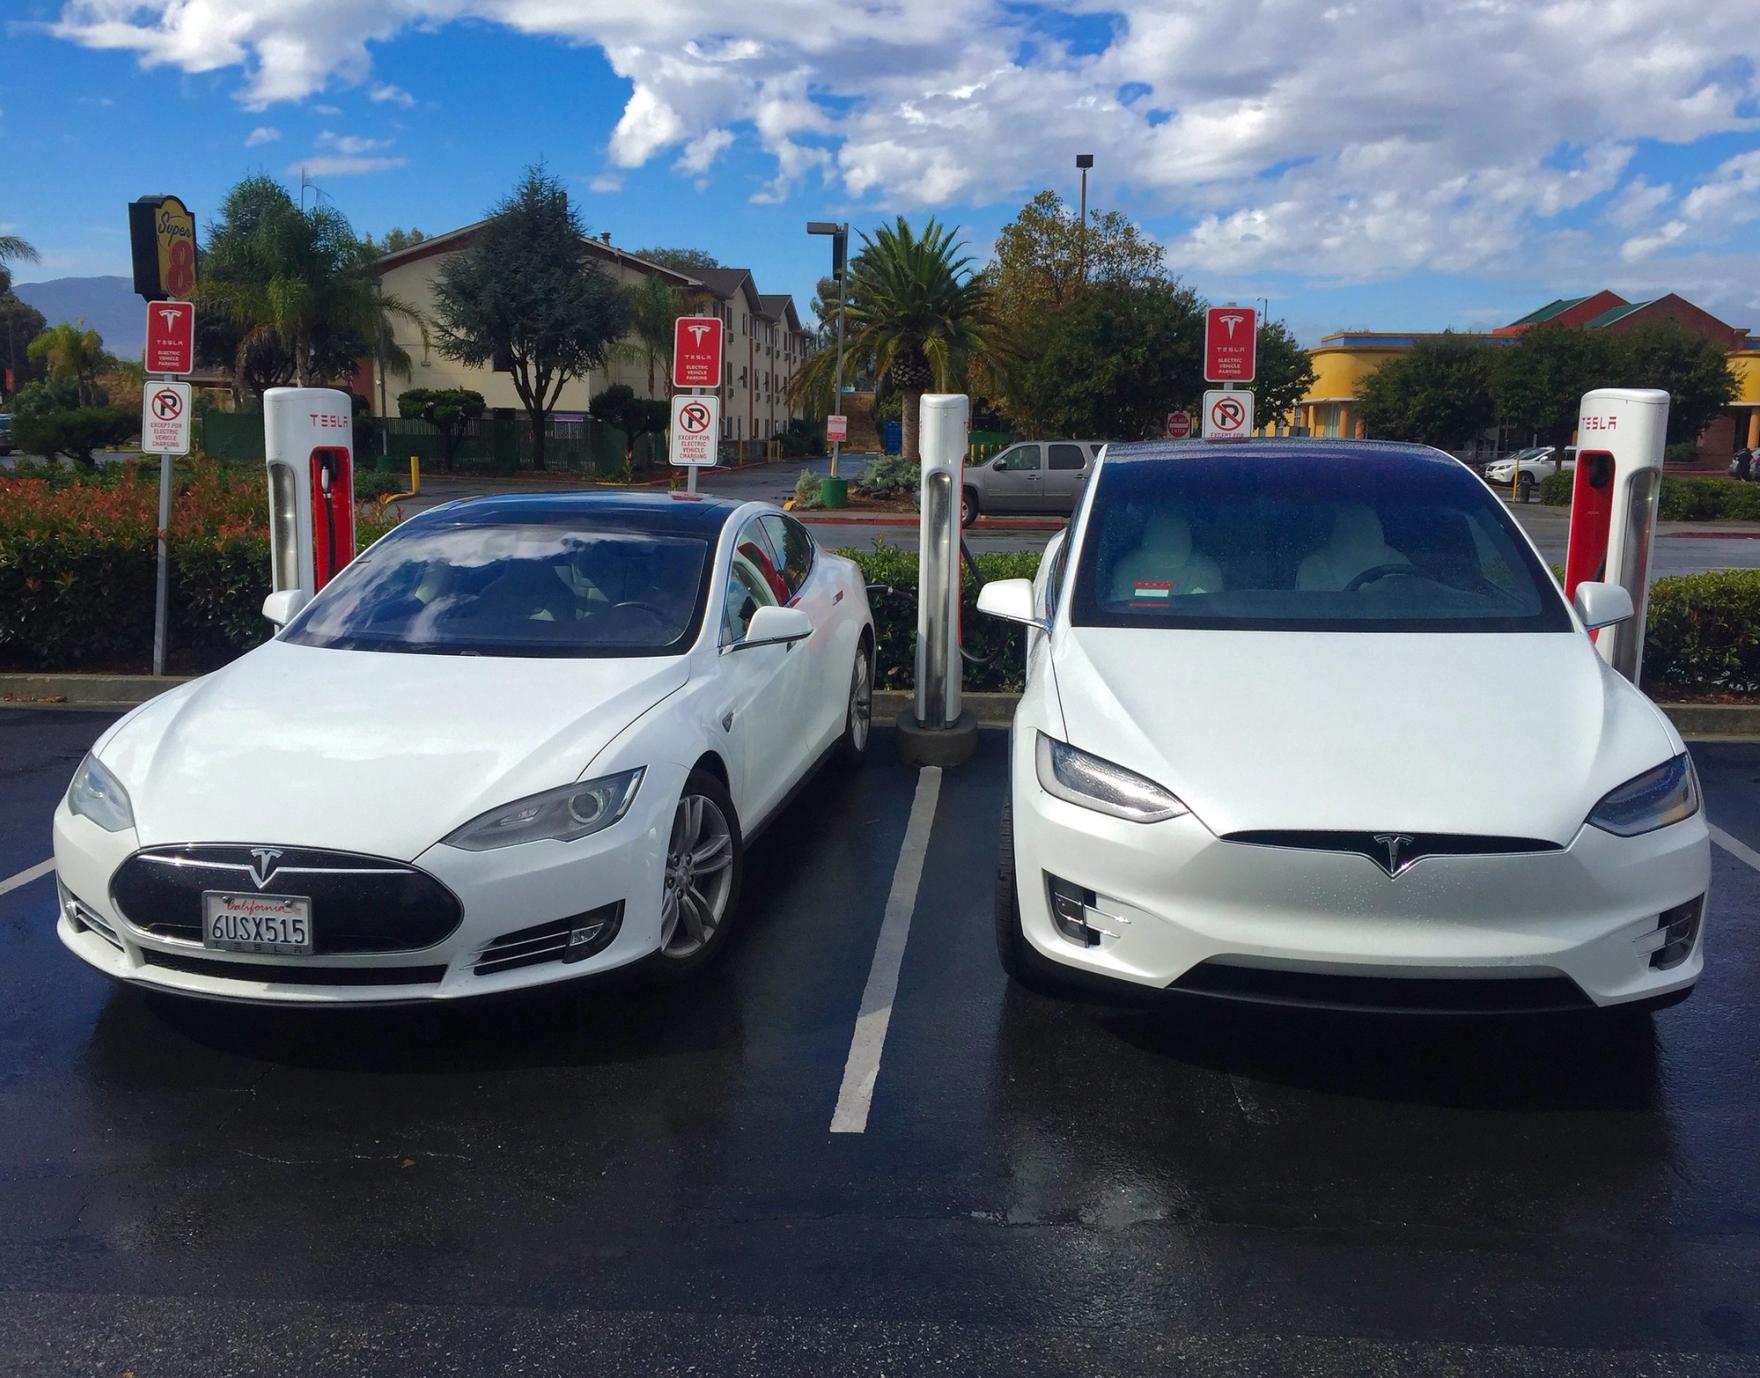 Two white Teslas charging next to each other